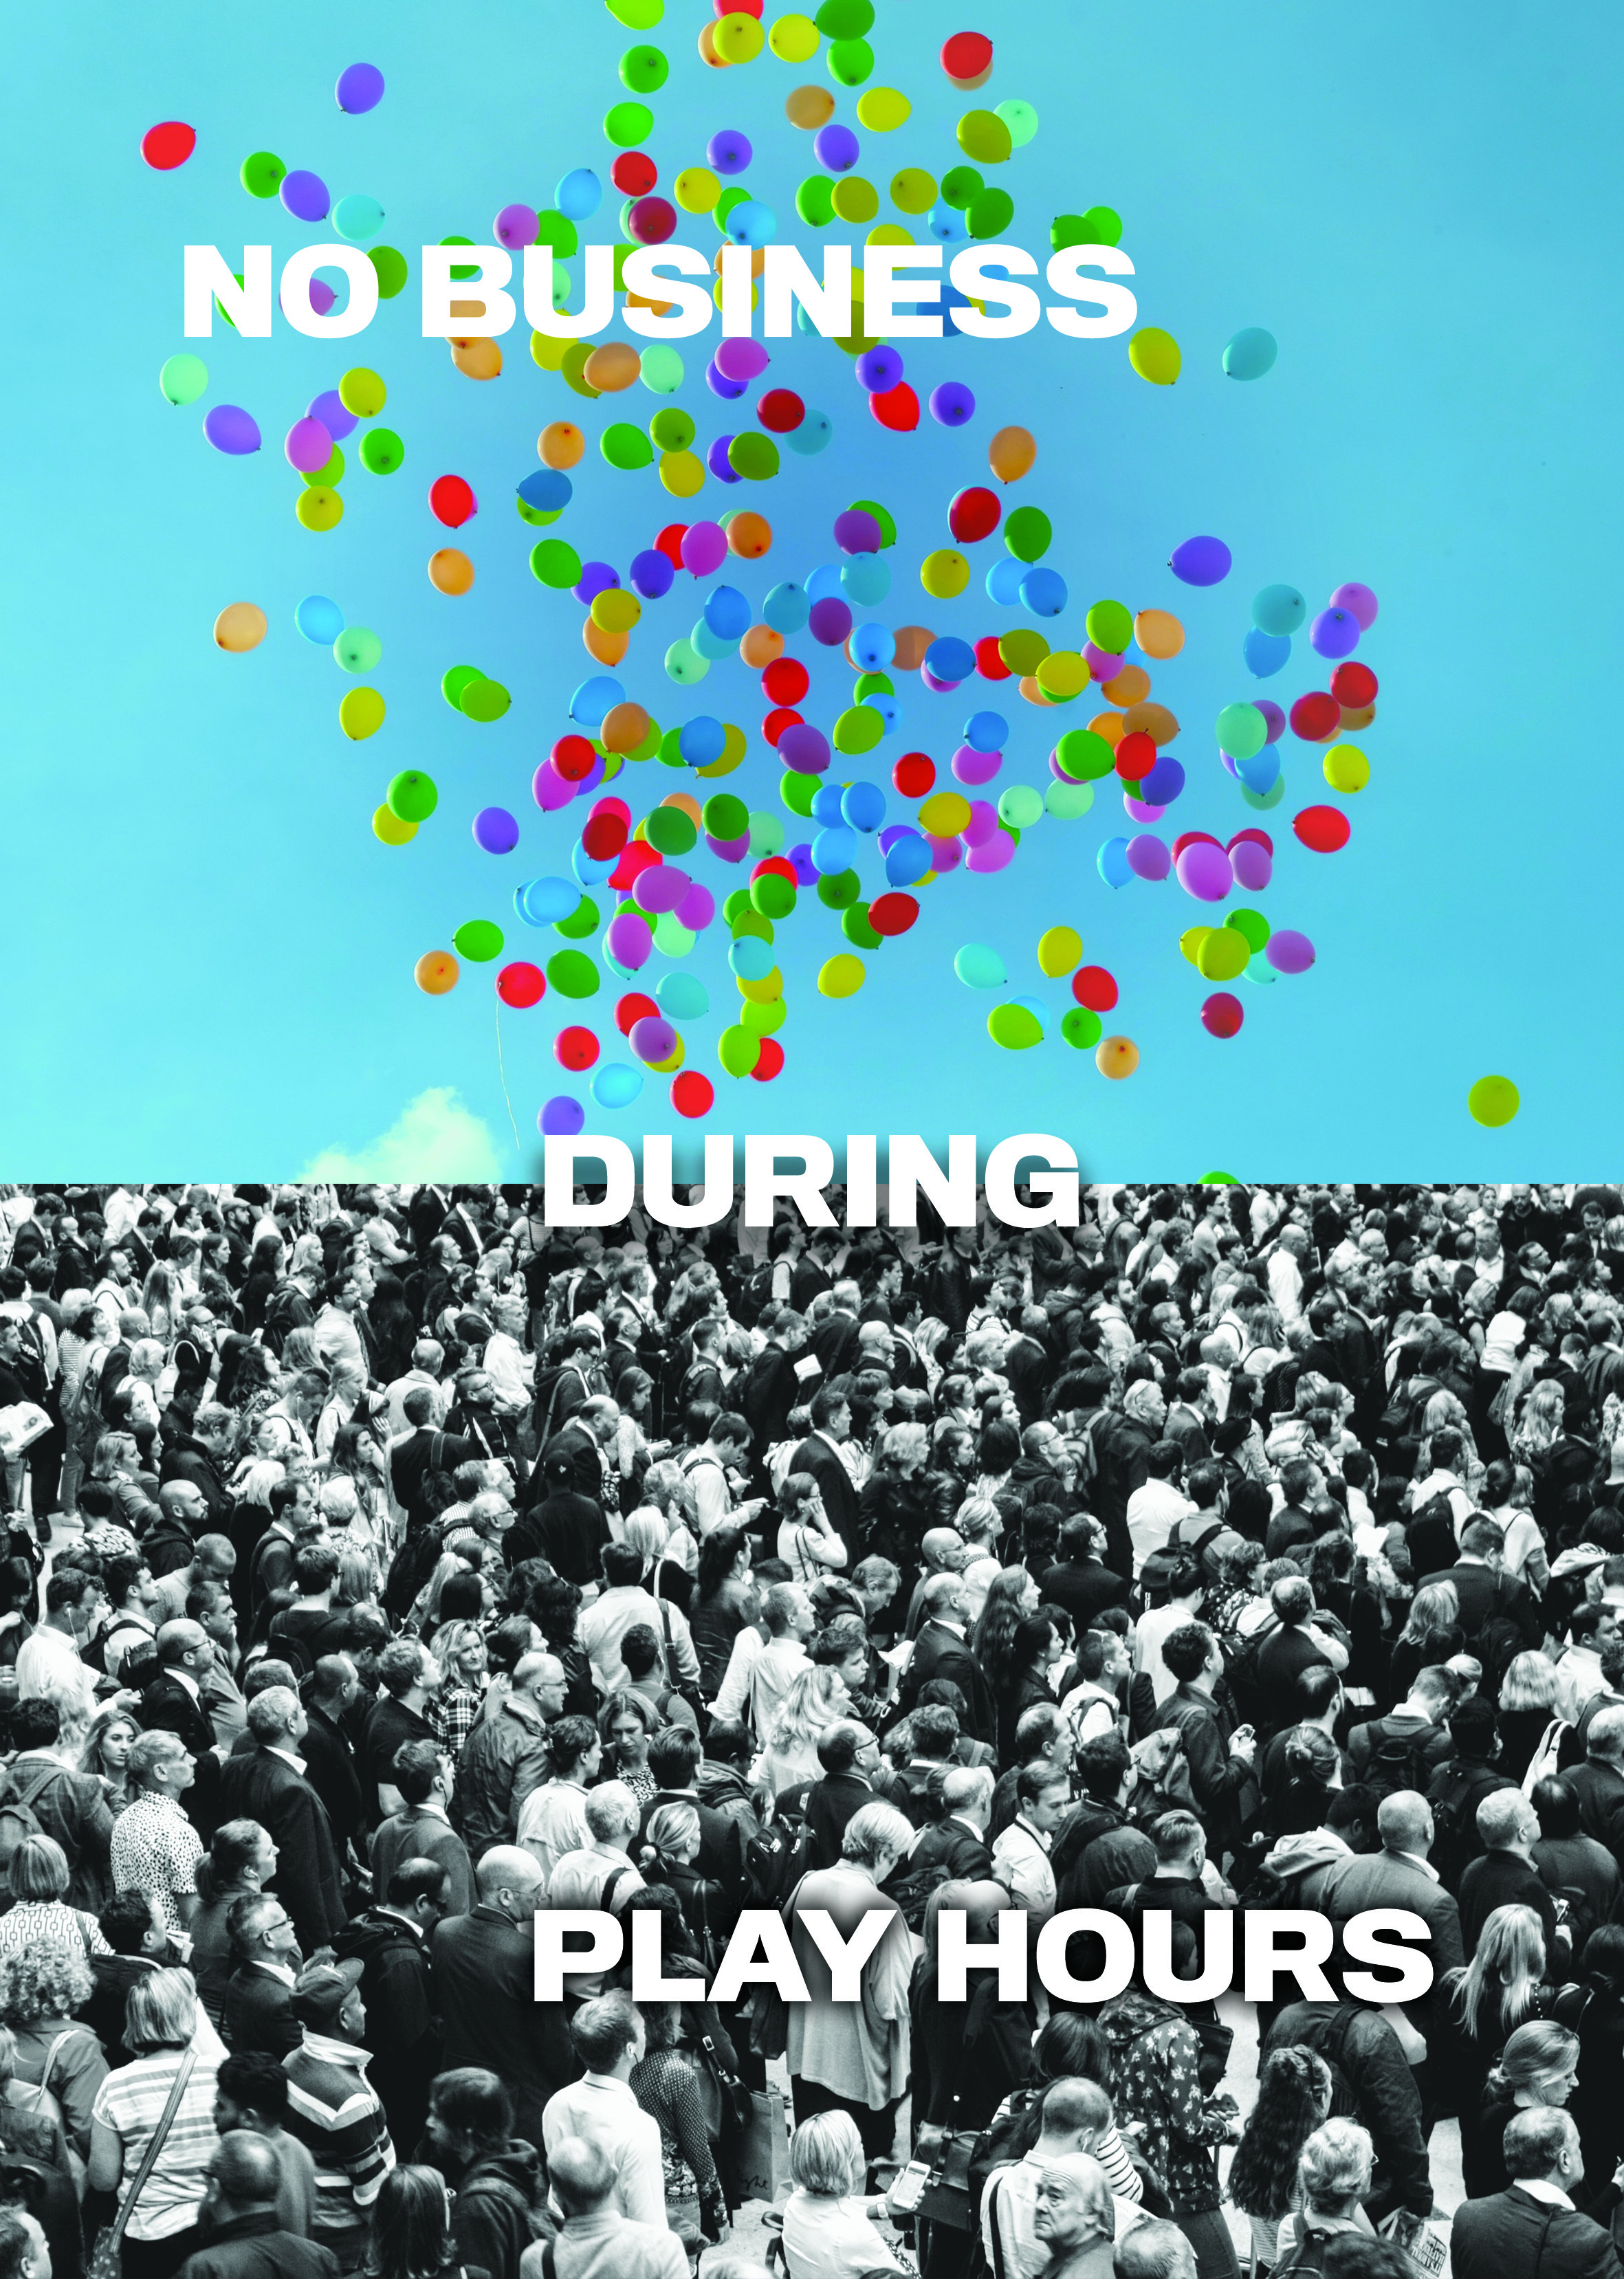 Vibrant and colorful balloons fly over a black and white crowd. The words NO BUSINESS DURING PLAY HOURS are superimposed upon the images.